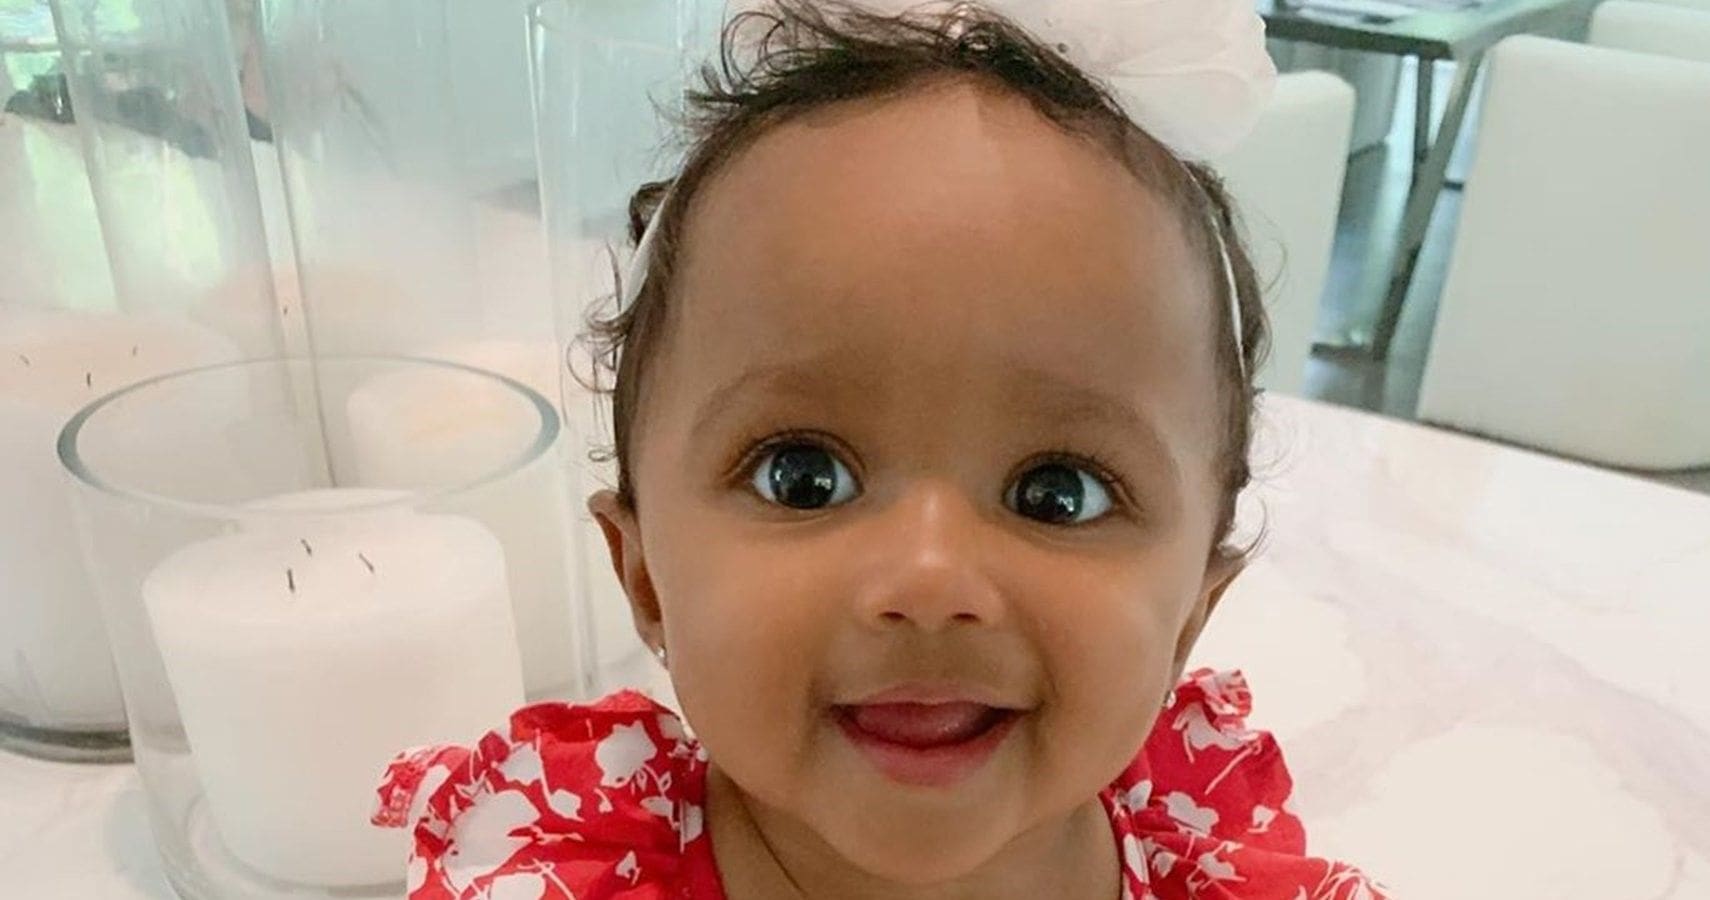 Kenya Moore's Baby Girl, Brooklyn Daly Is A Tough Cookie In This Video